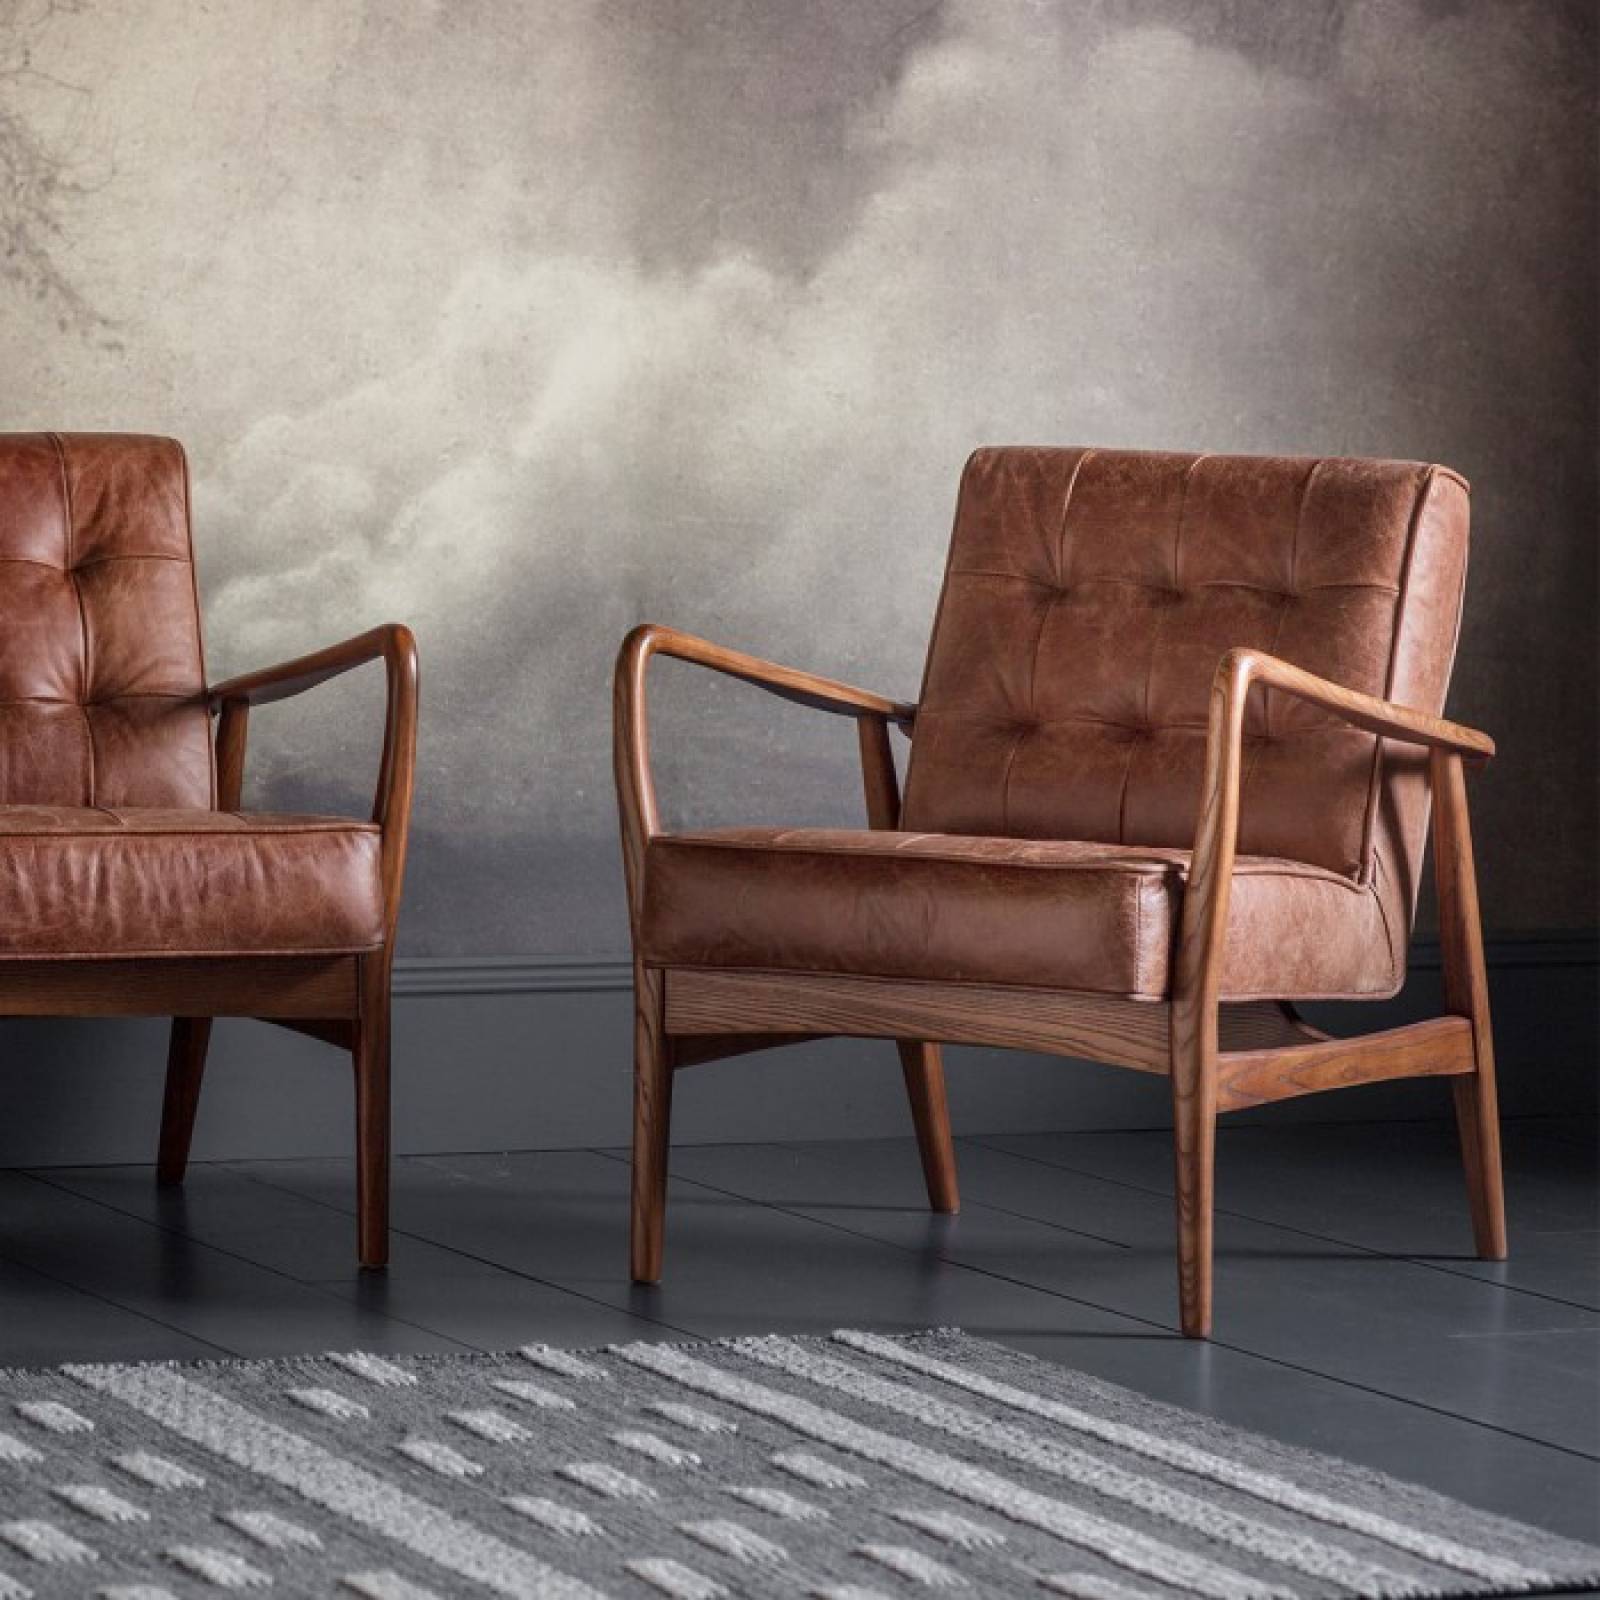 The Olsen Armchair Leather, Distressed Brown Leather Chair